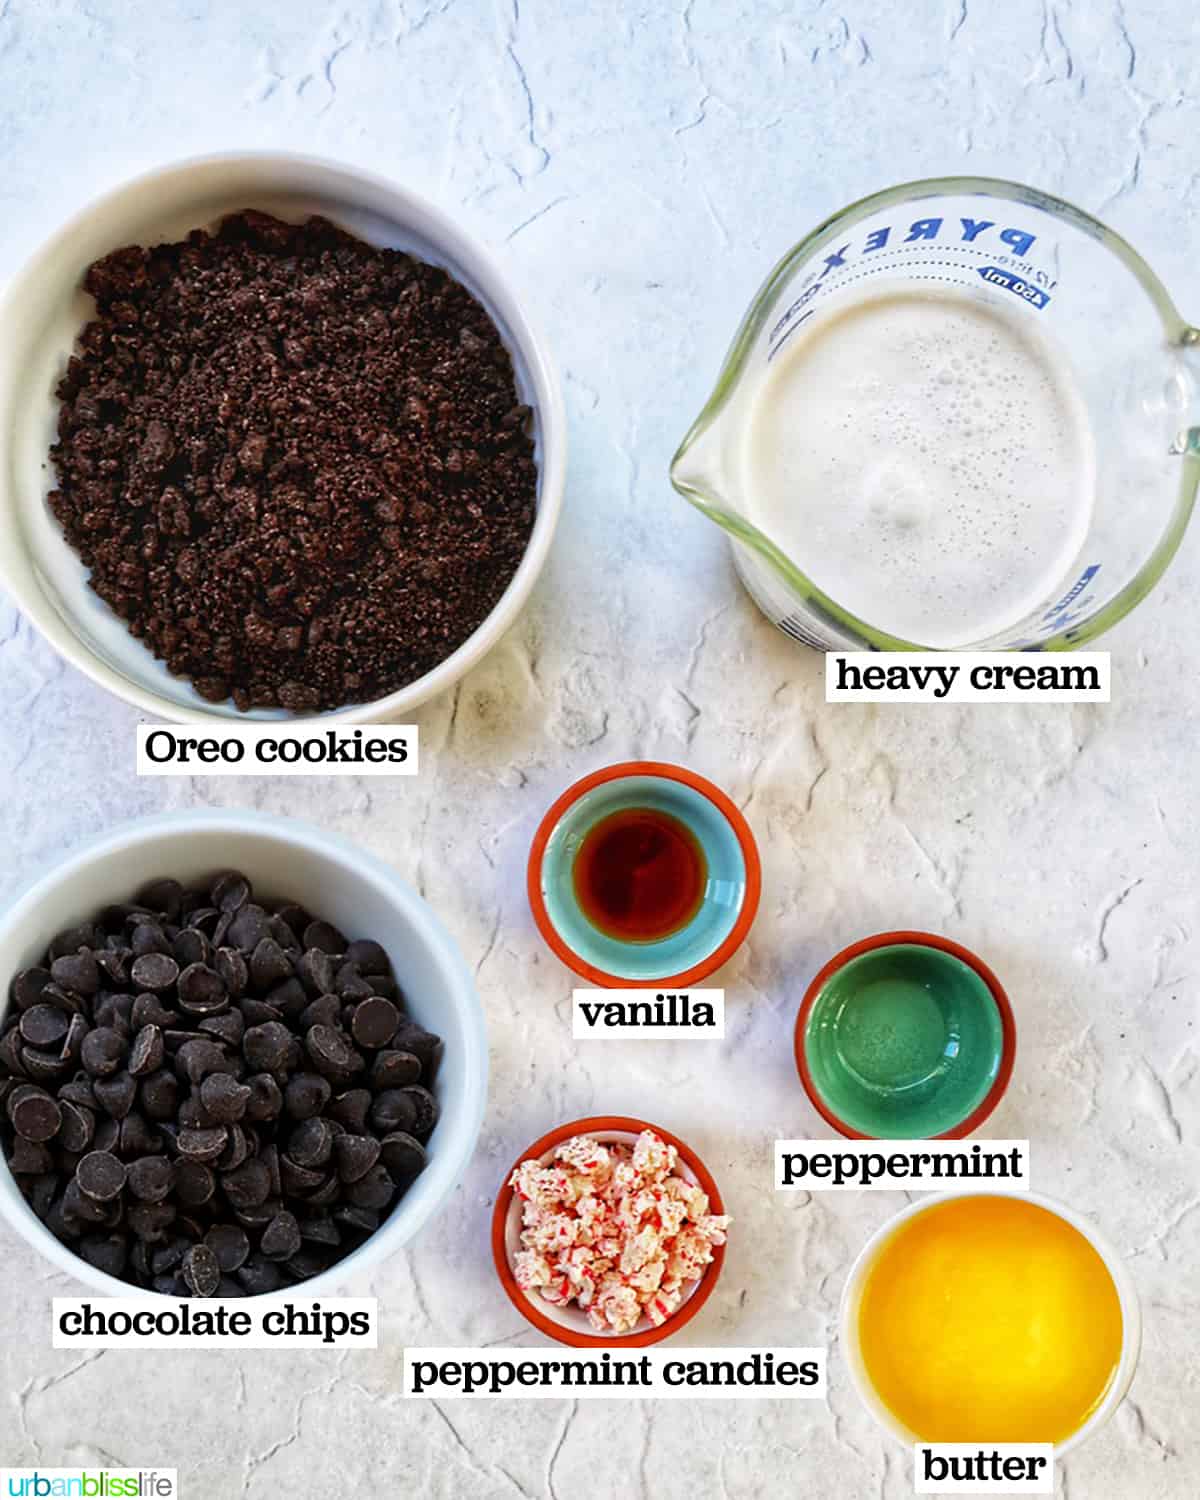 bowls of ingredients to make chocolate peppermint pie.